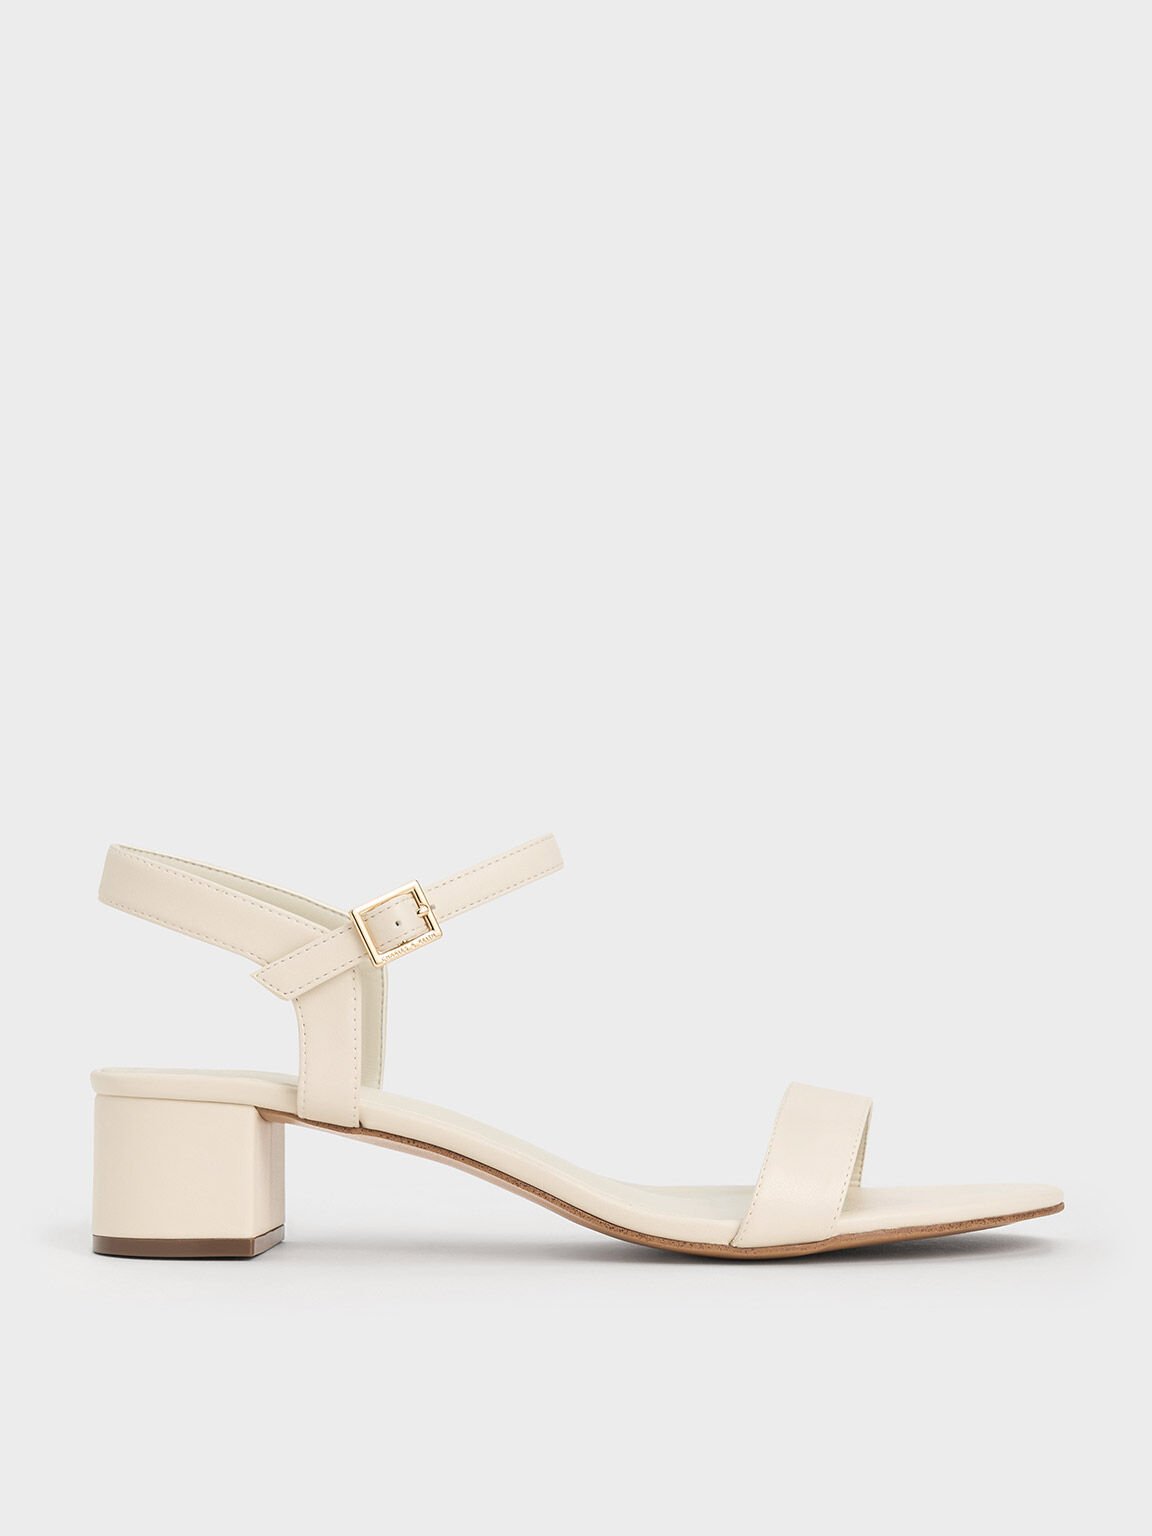 White Block Heel Ankle-Strap Sandals - CHARLES & KEITH SG